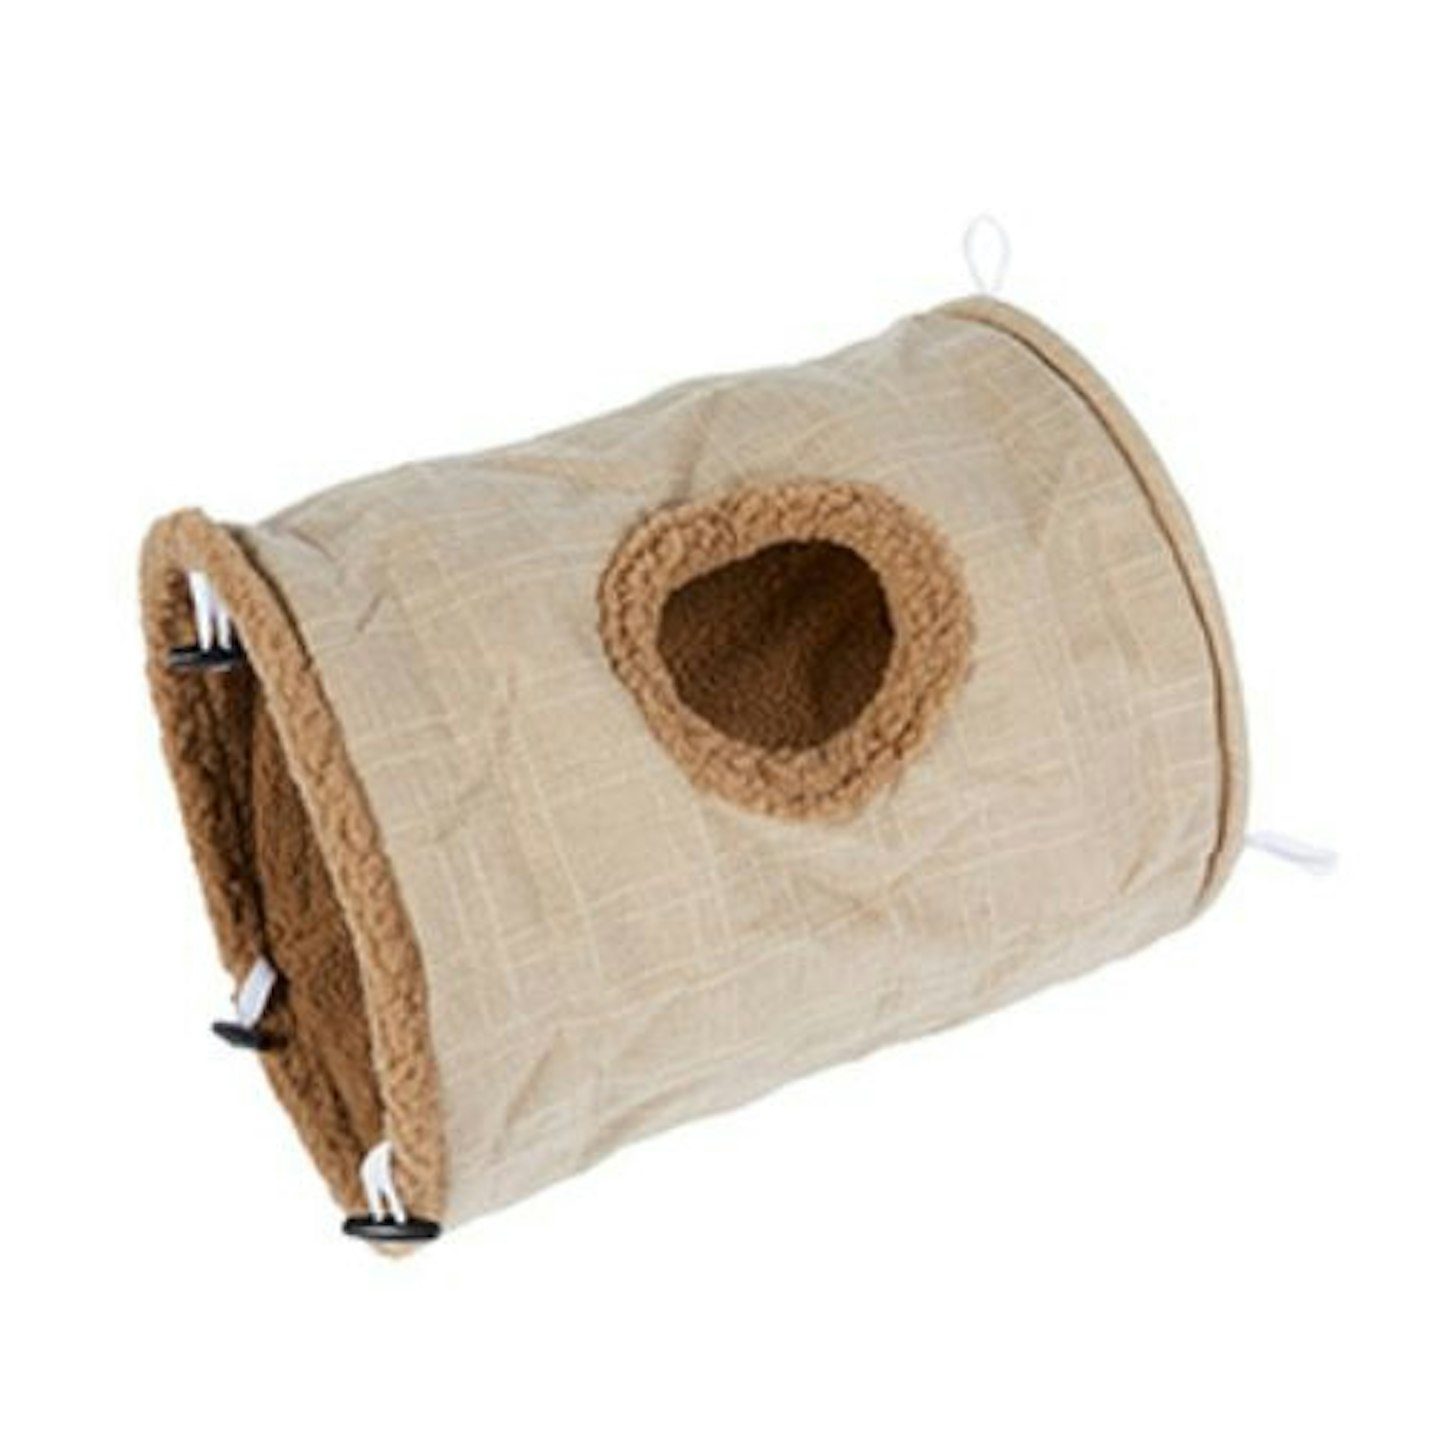 Willow's Linen Cat Tunnel Toy